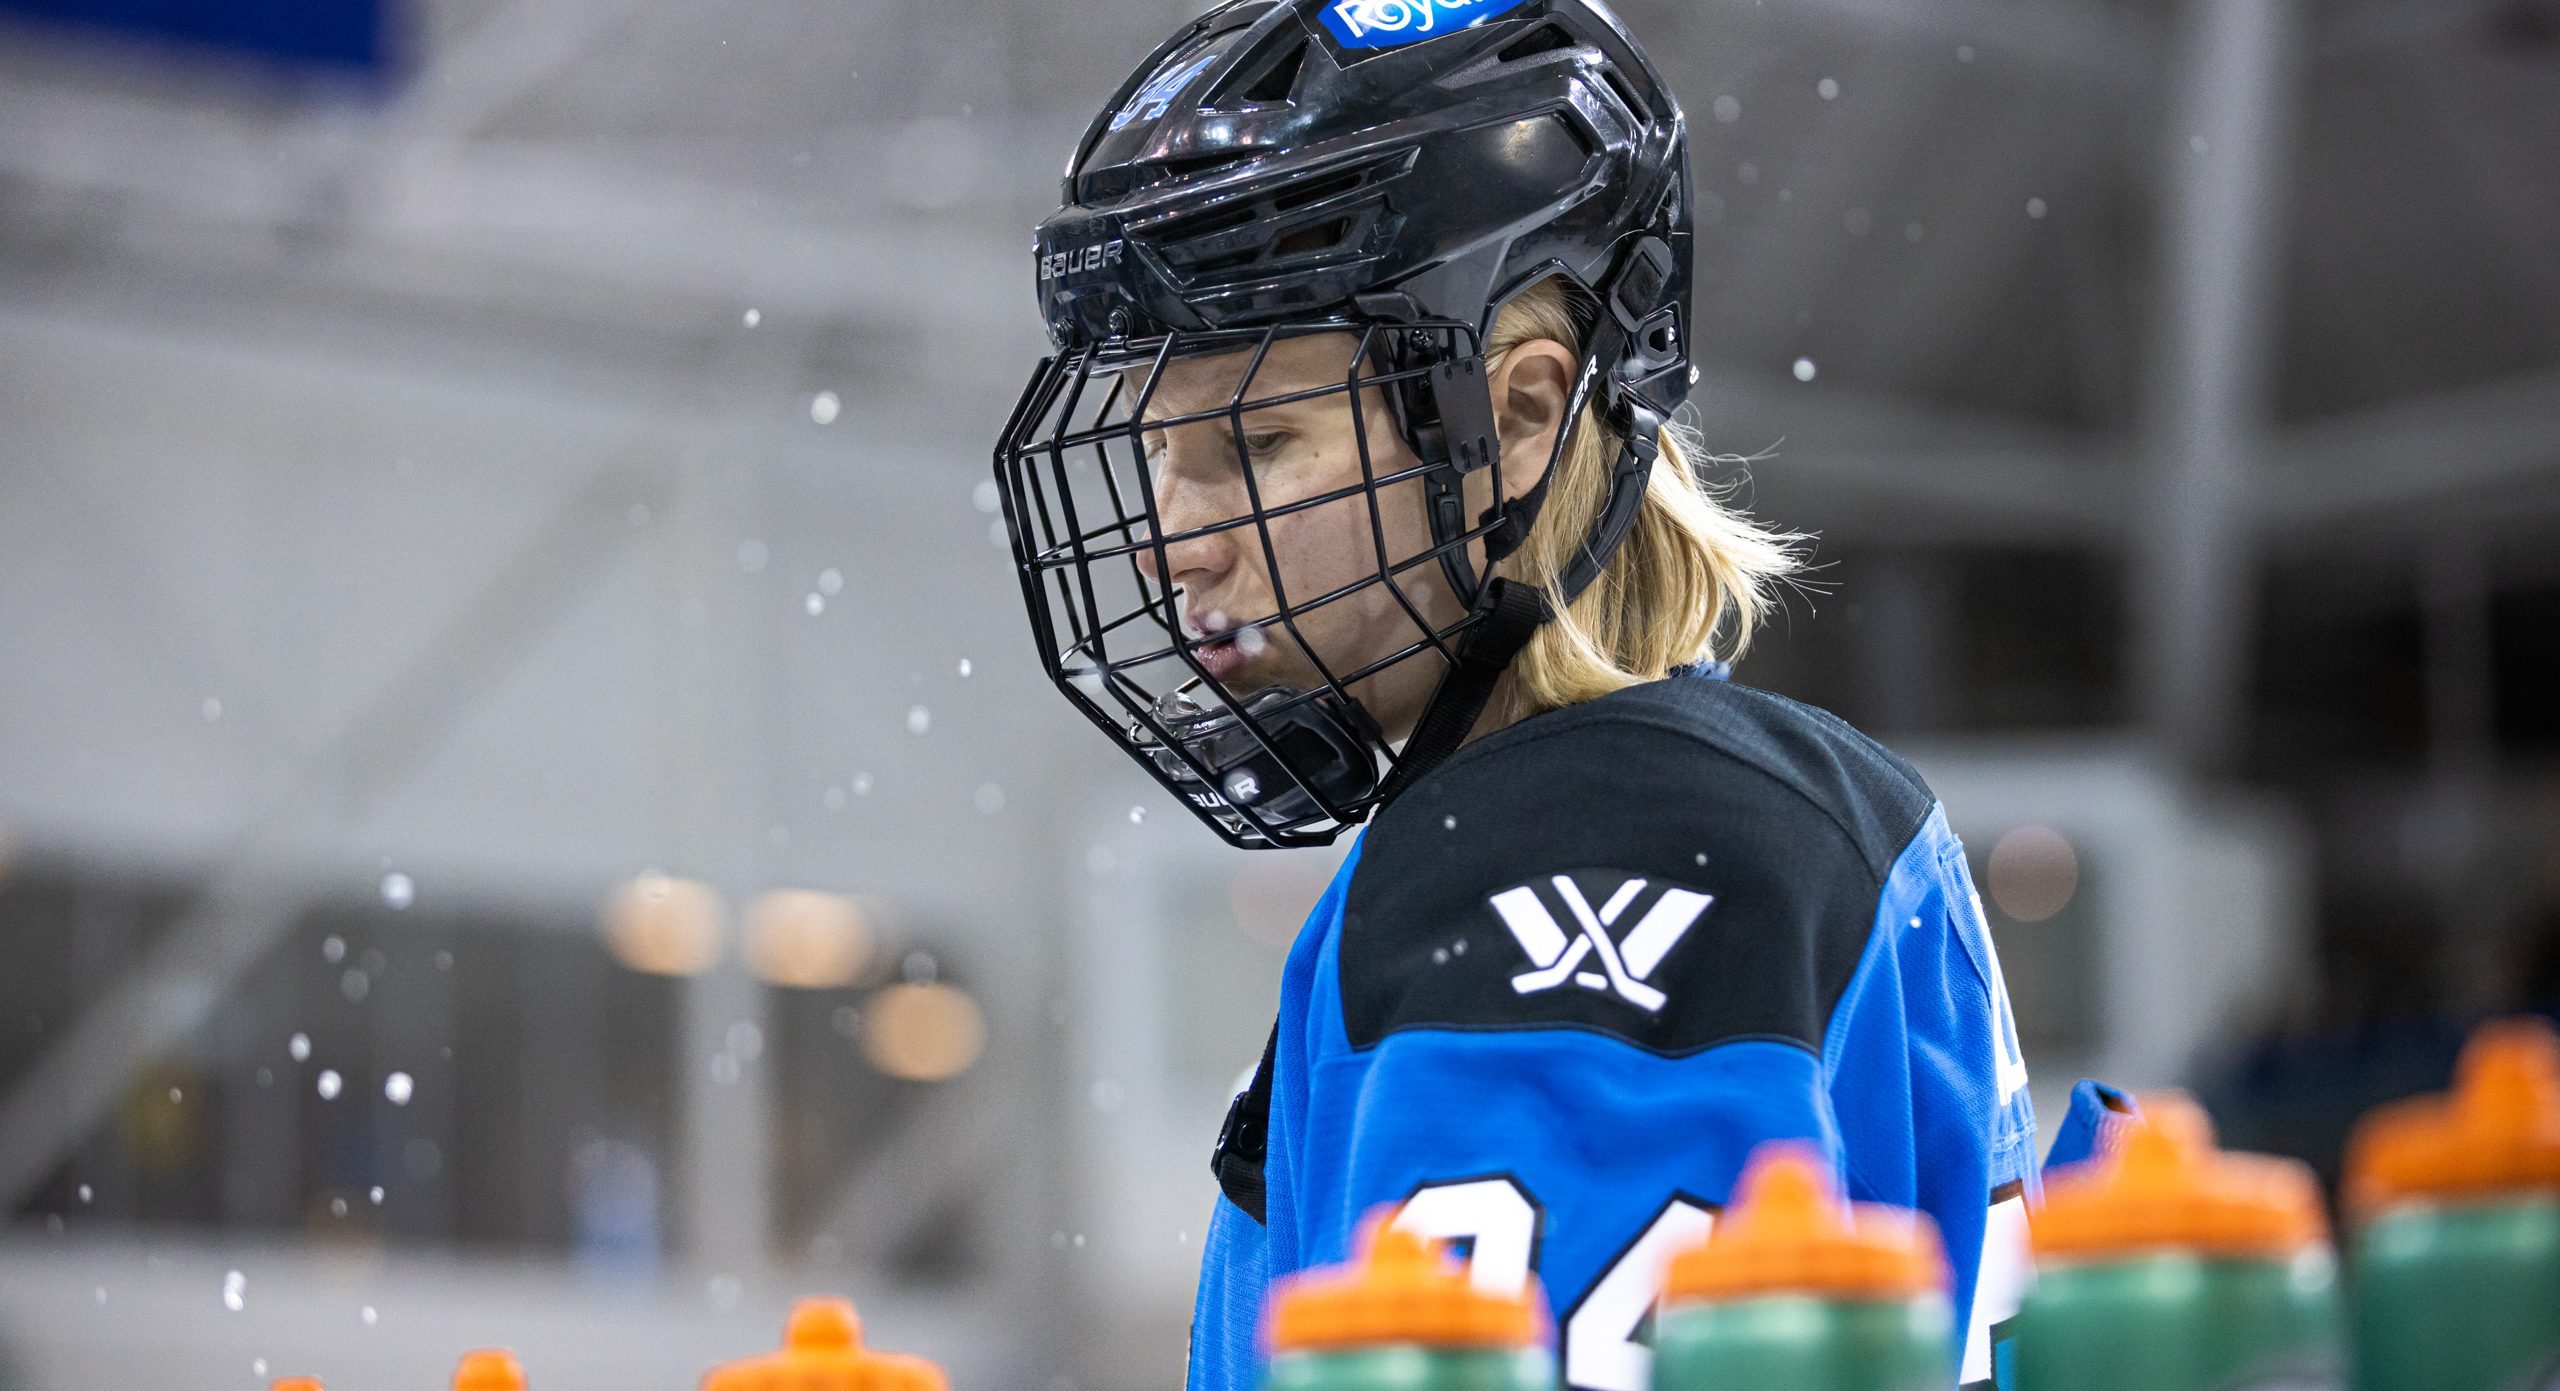 PWHL Toronto's Hannah Miller stares down at the bench with green water bottles on it. Water molecules are spraying up at her